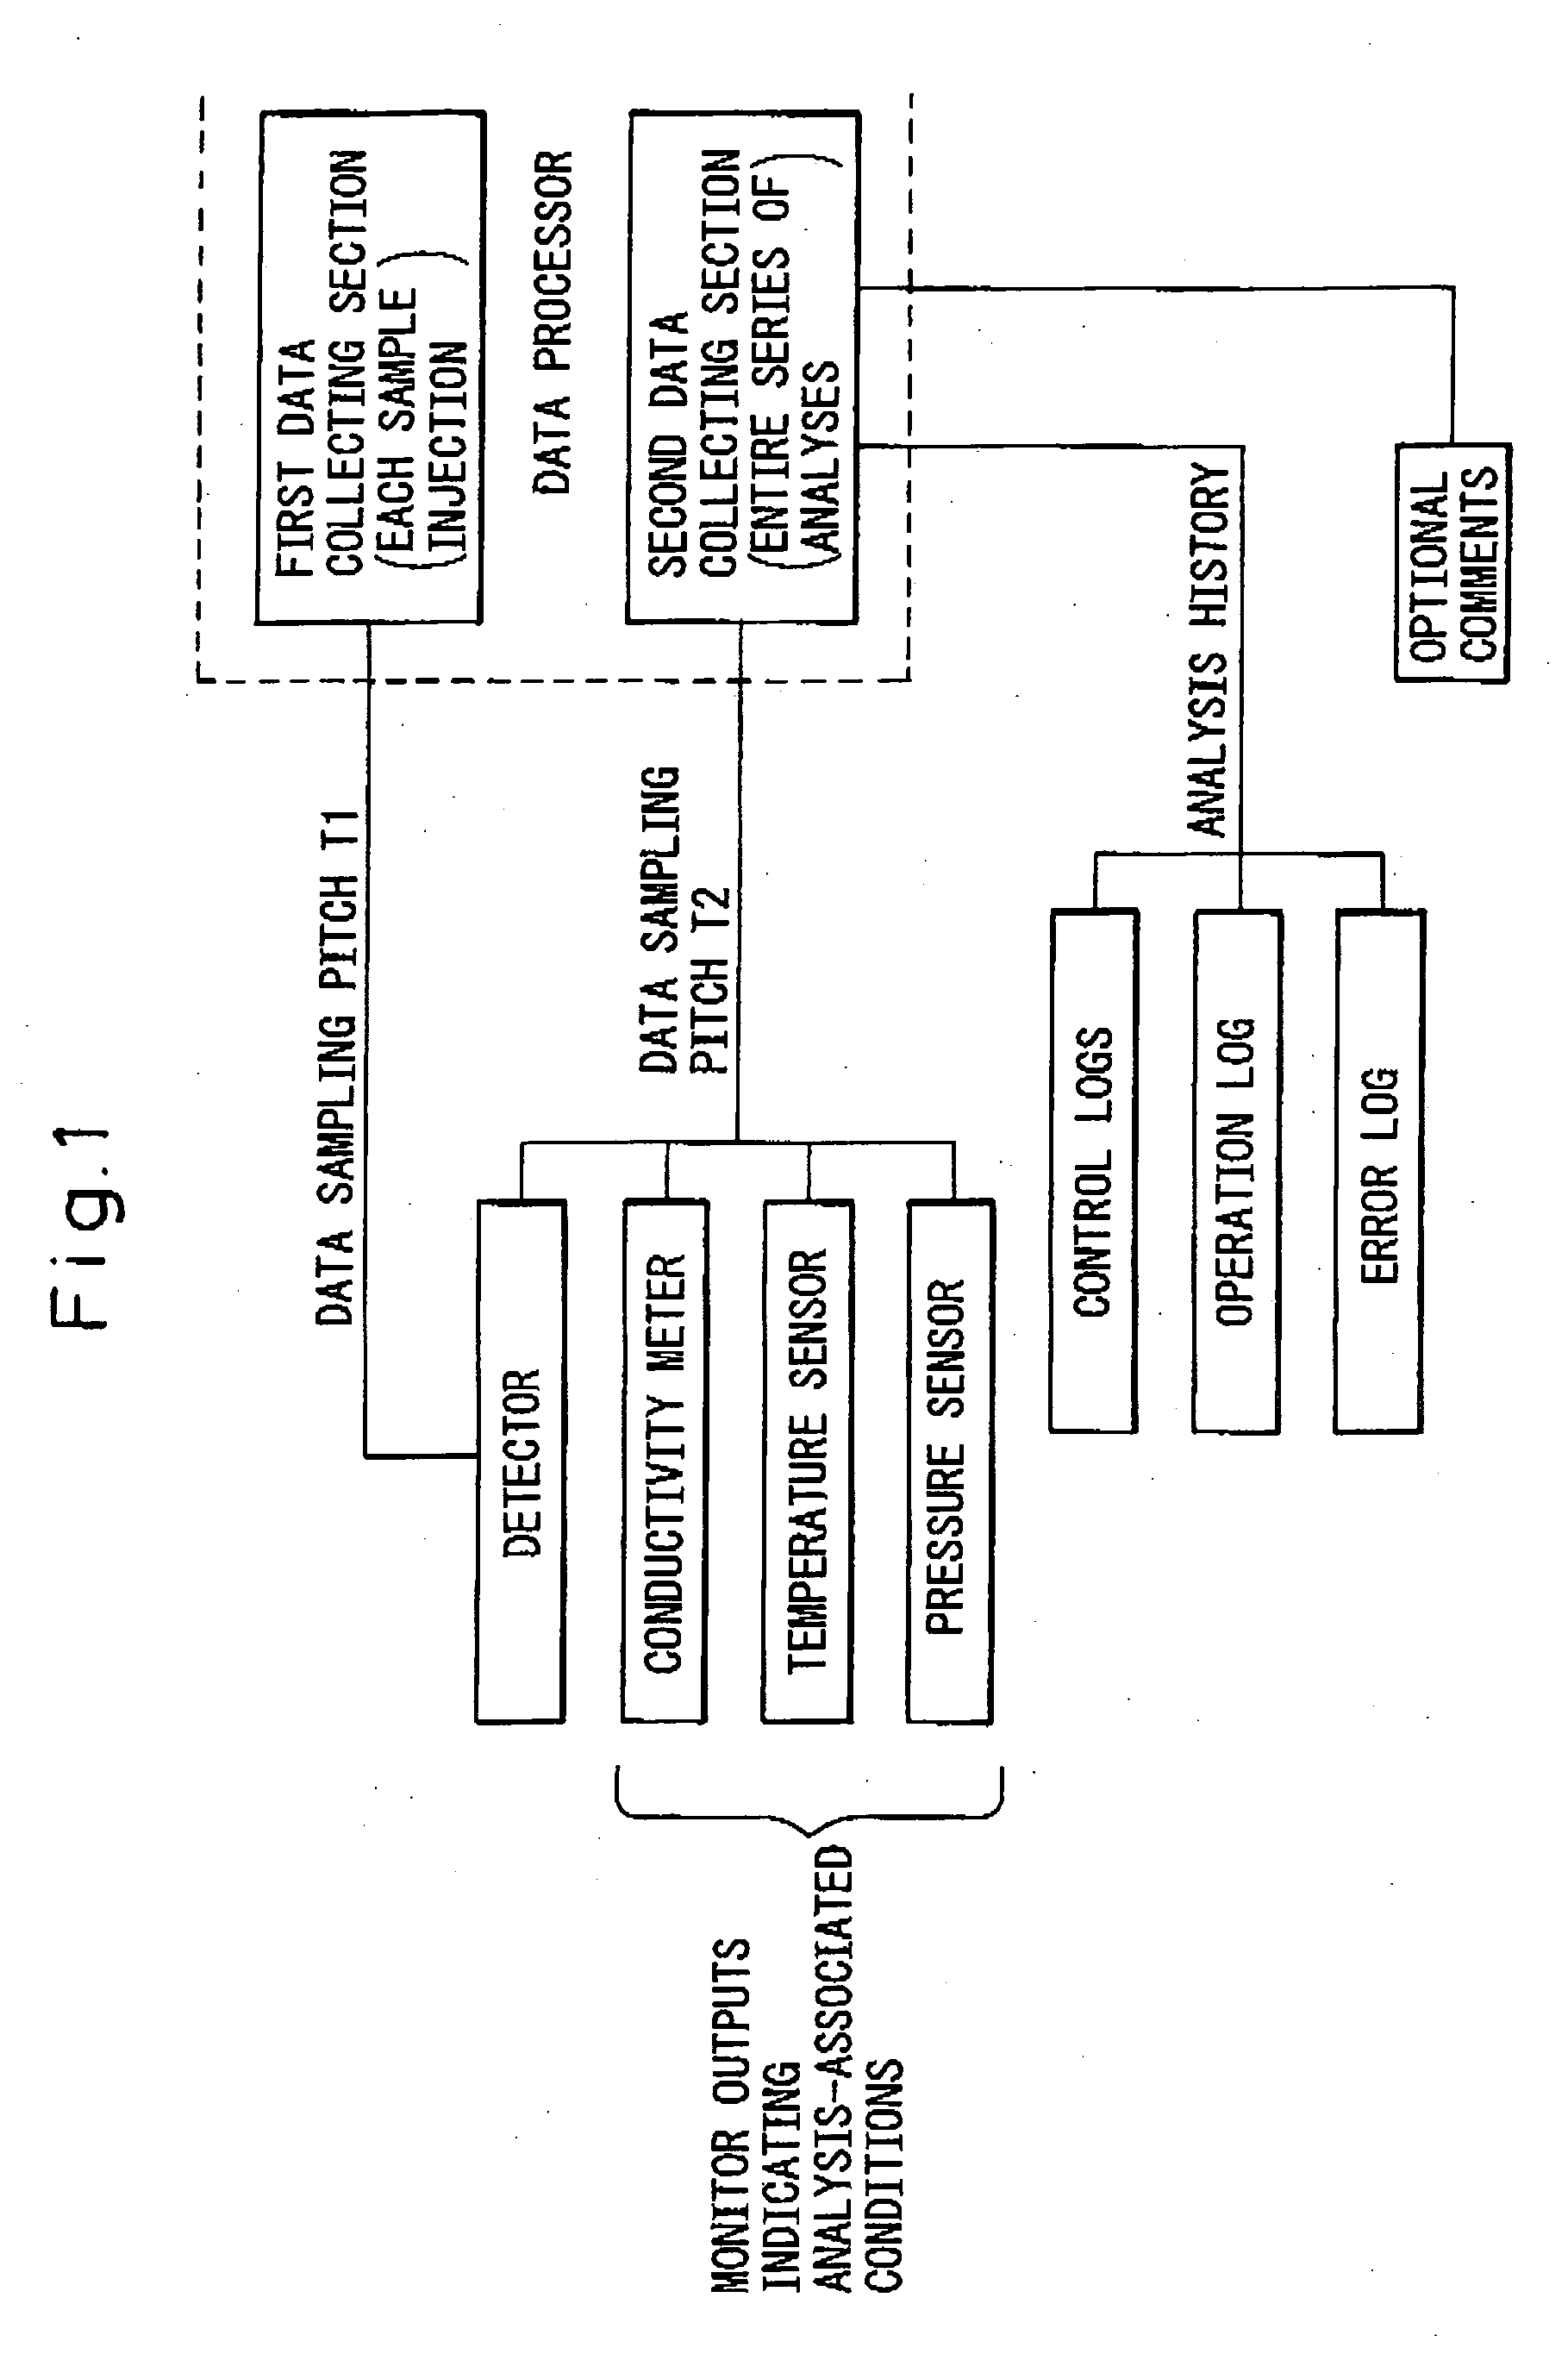 Data processor for use in chromatographic analysis